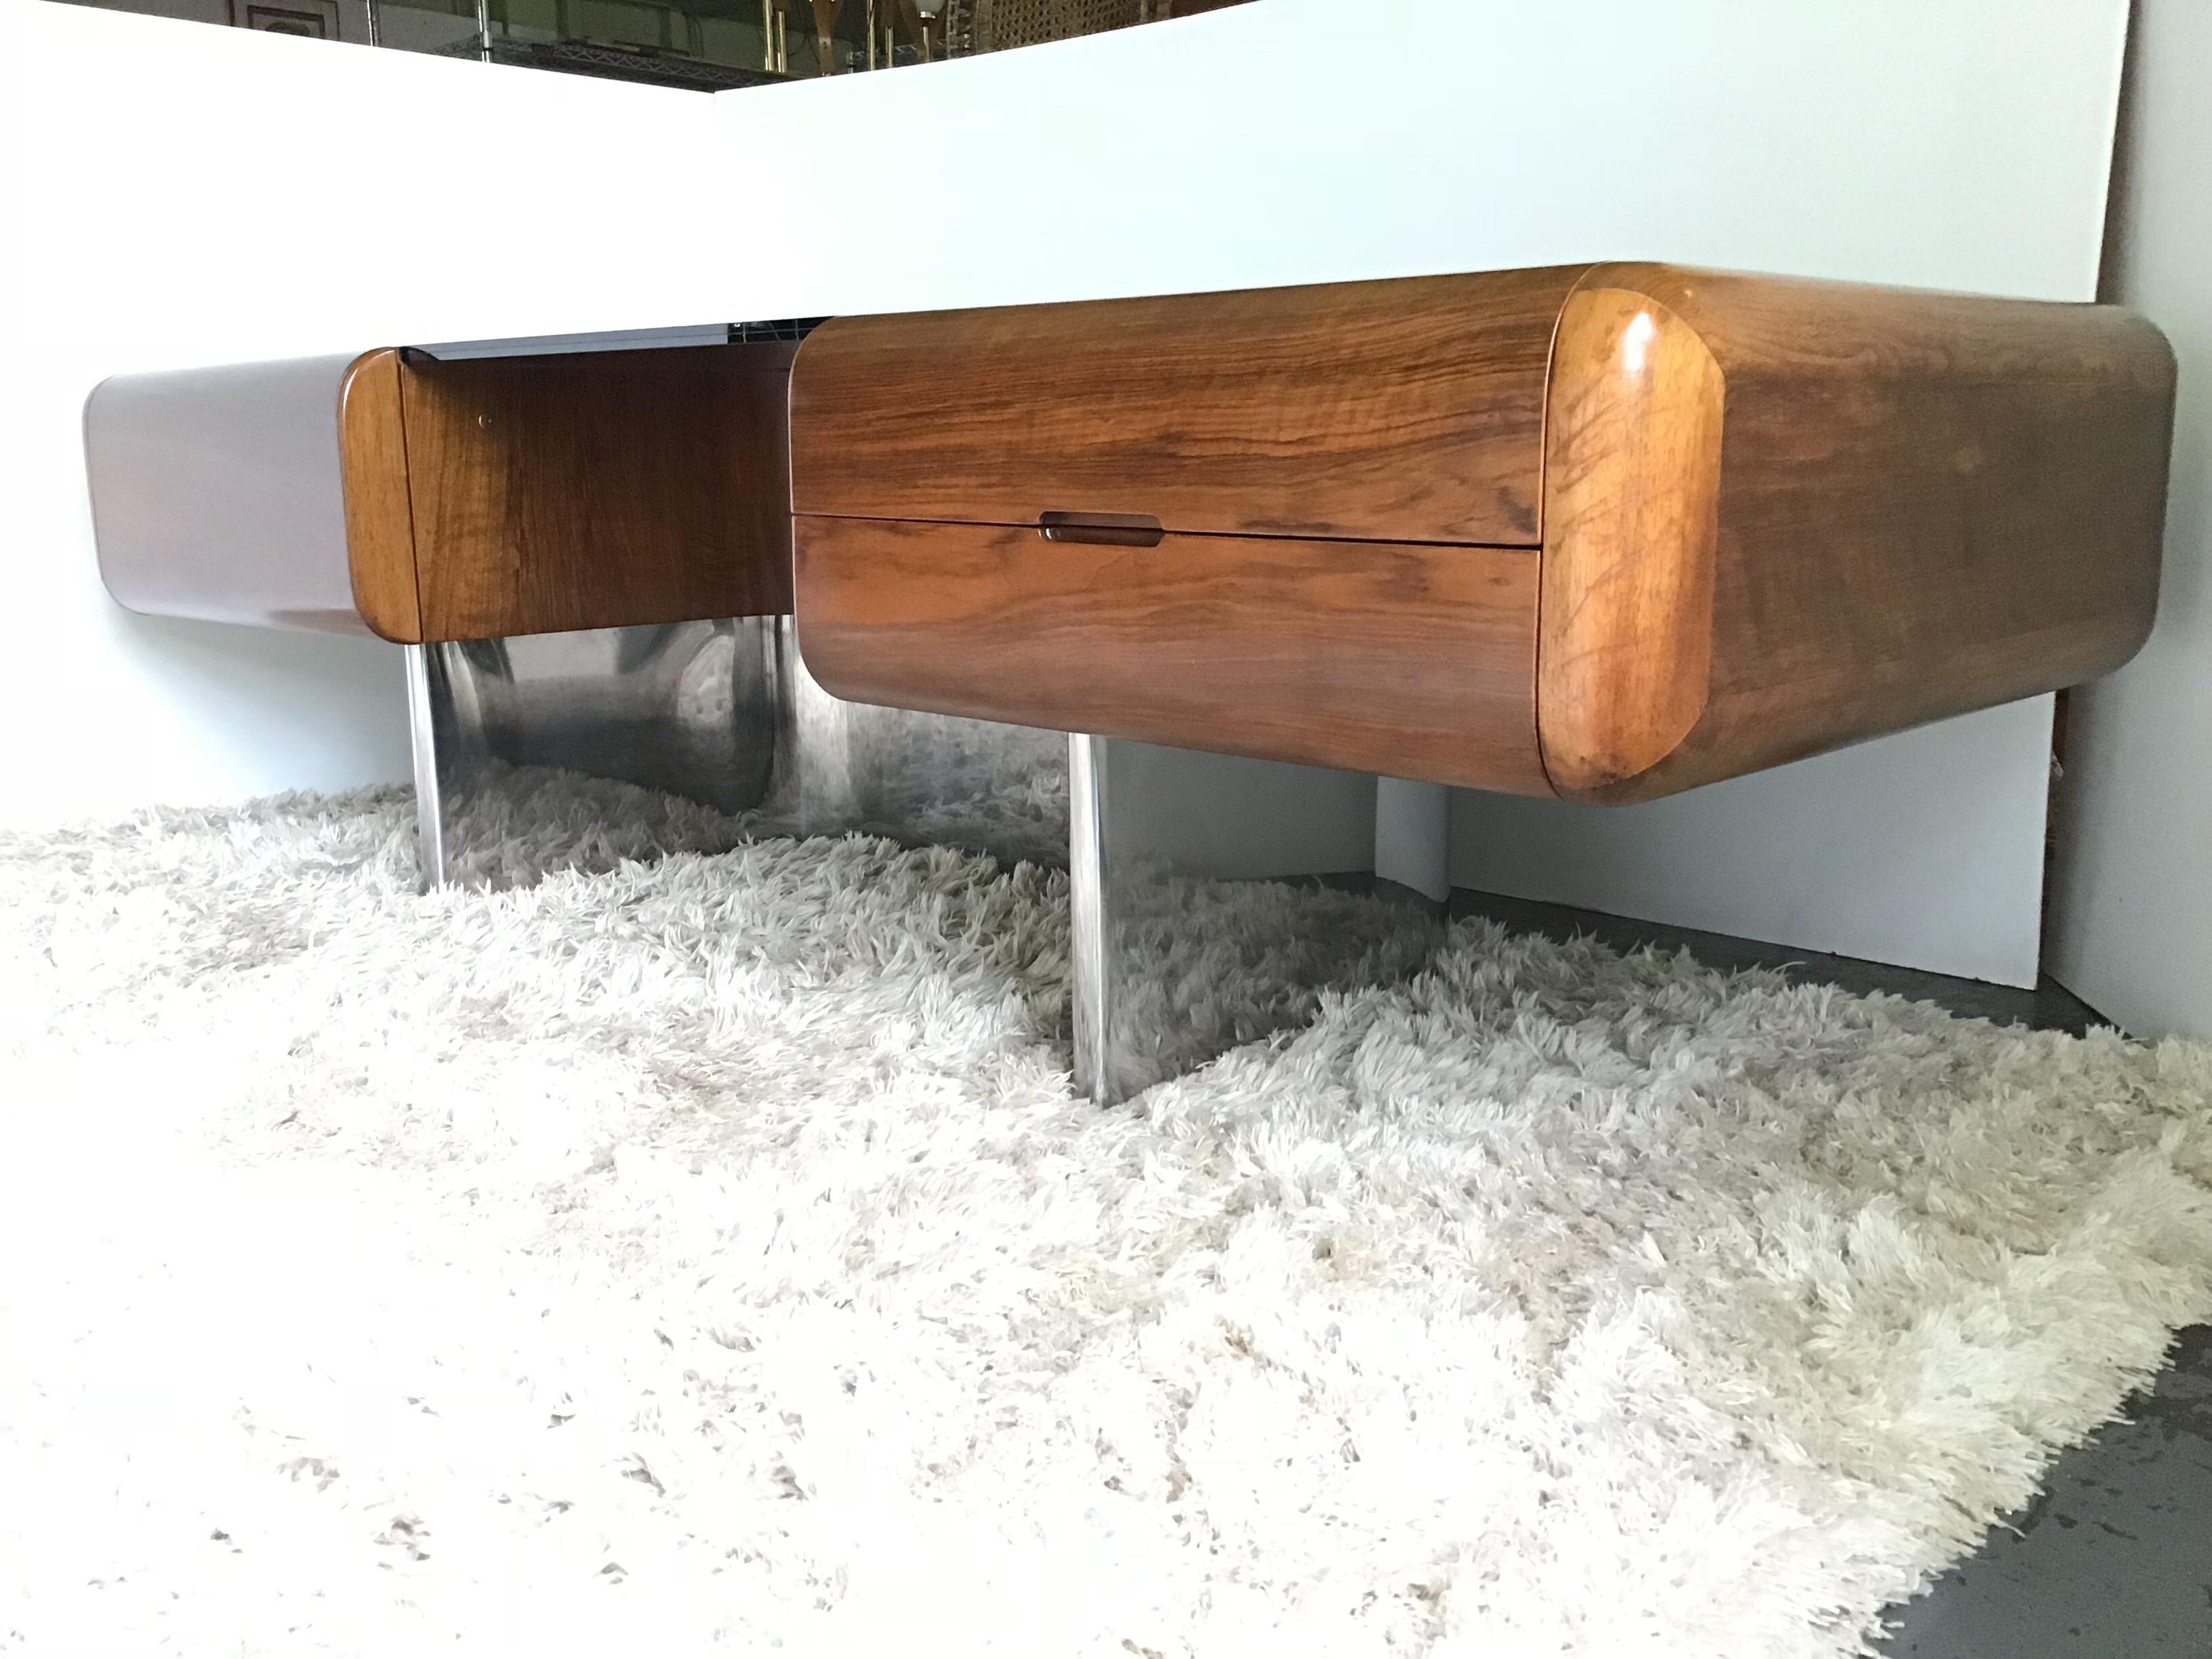 M.F. Harty Space Age “Tomorrow” Desk for Stow Davis  1